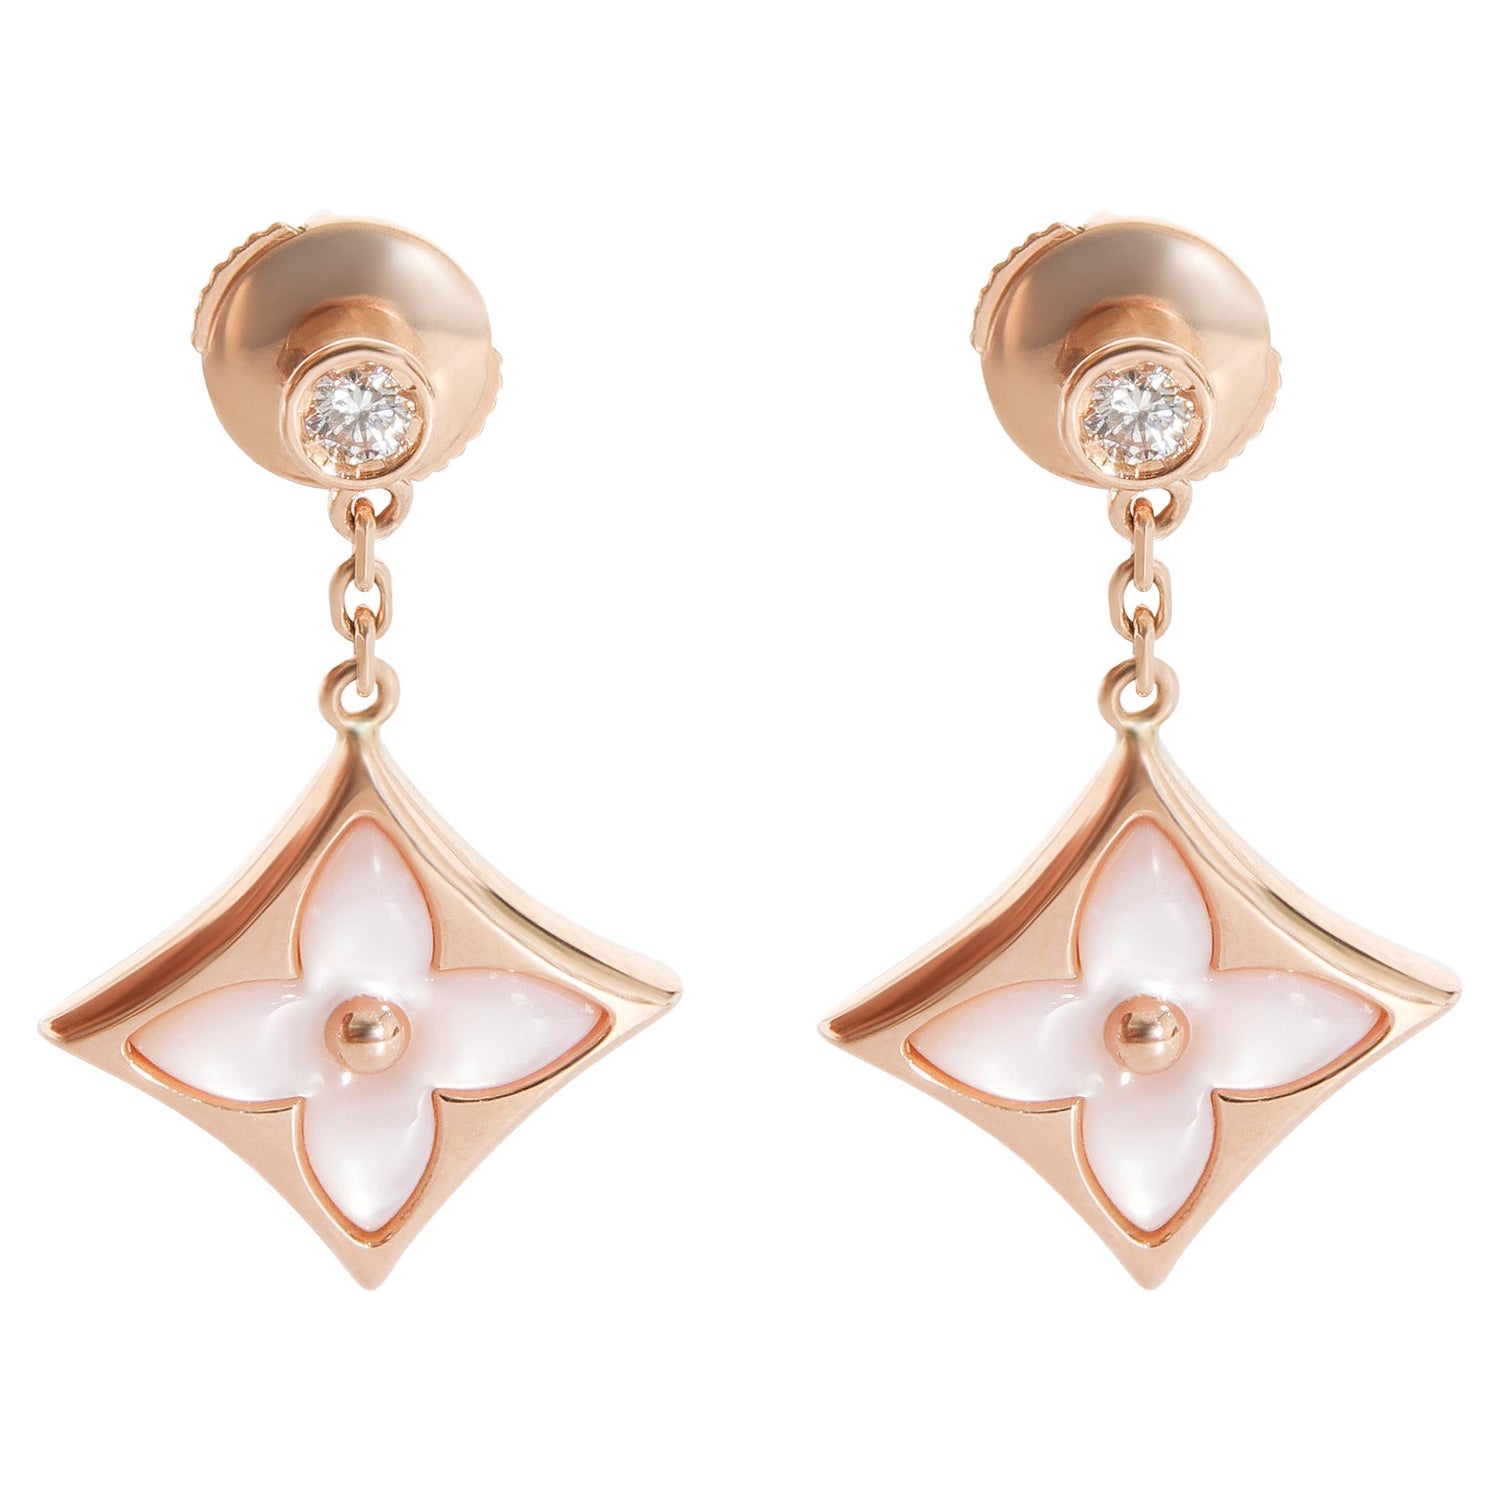 Blossom earrings Louis Vuitton Gold in Other - 19917224